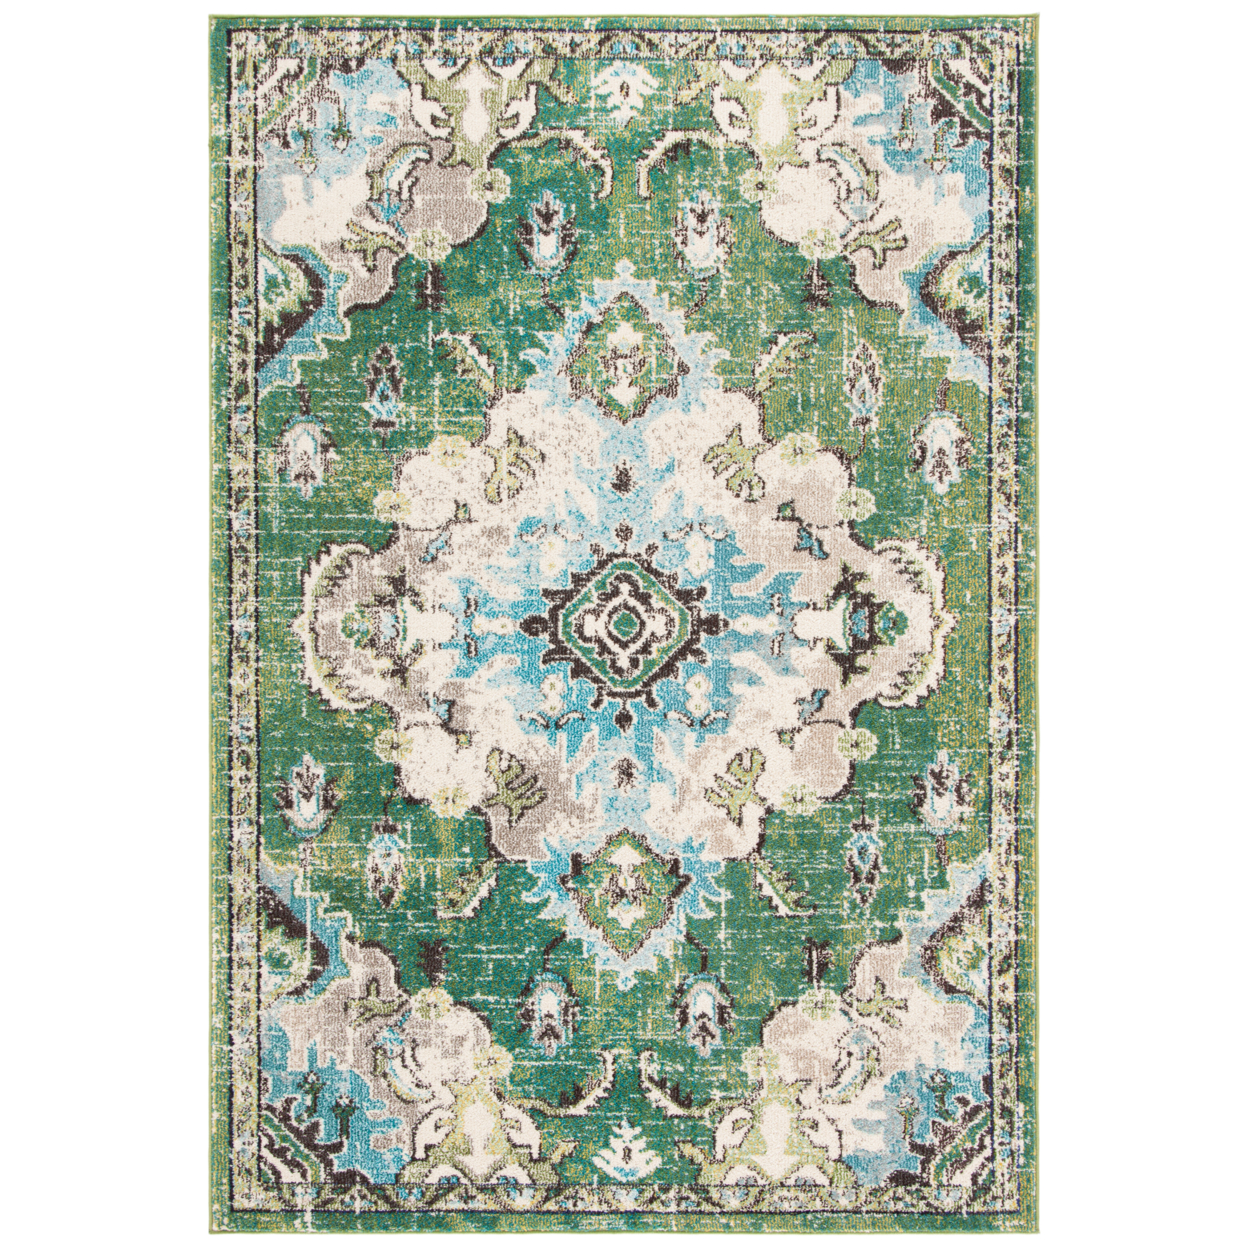 SAFAVIEH Madison Collection MAD484Y Green/ Light Blue Rug - 2' 2 X 14'